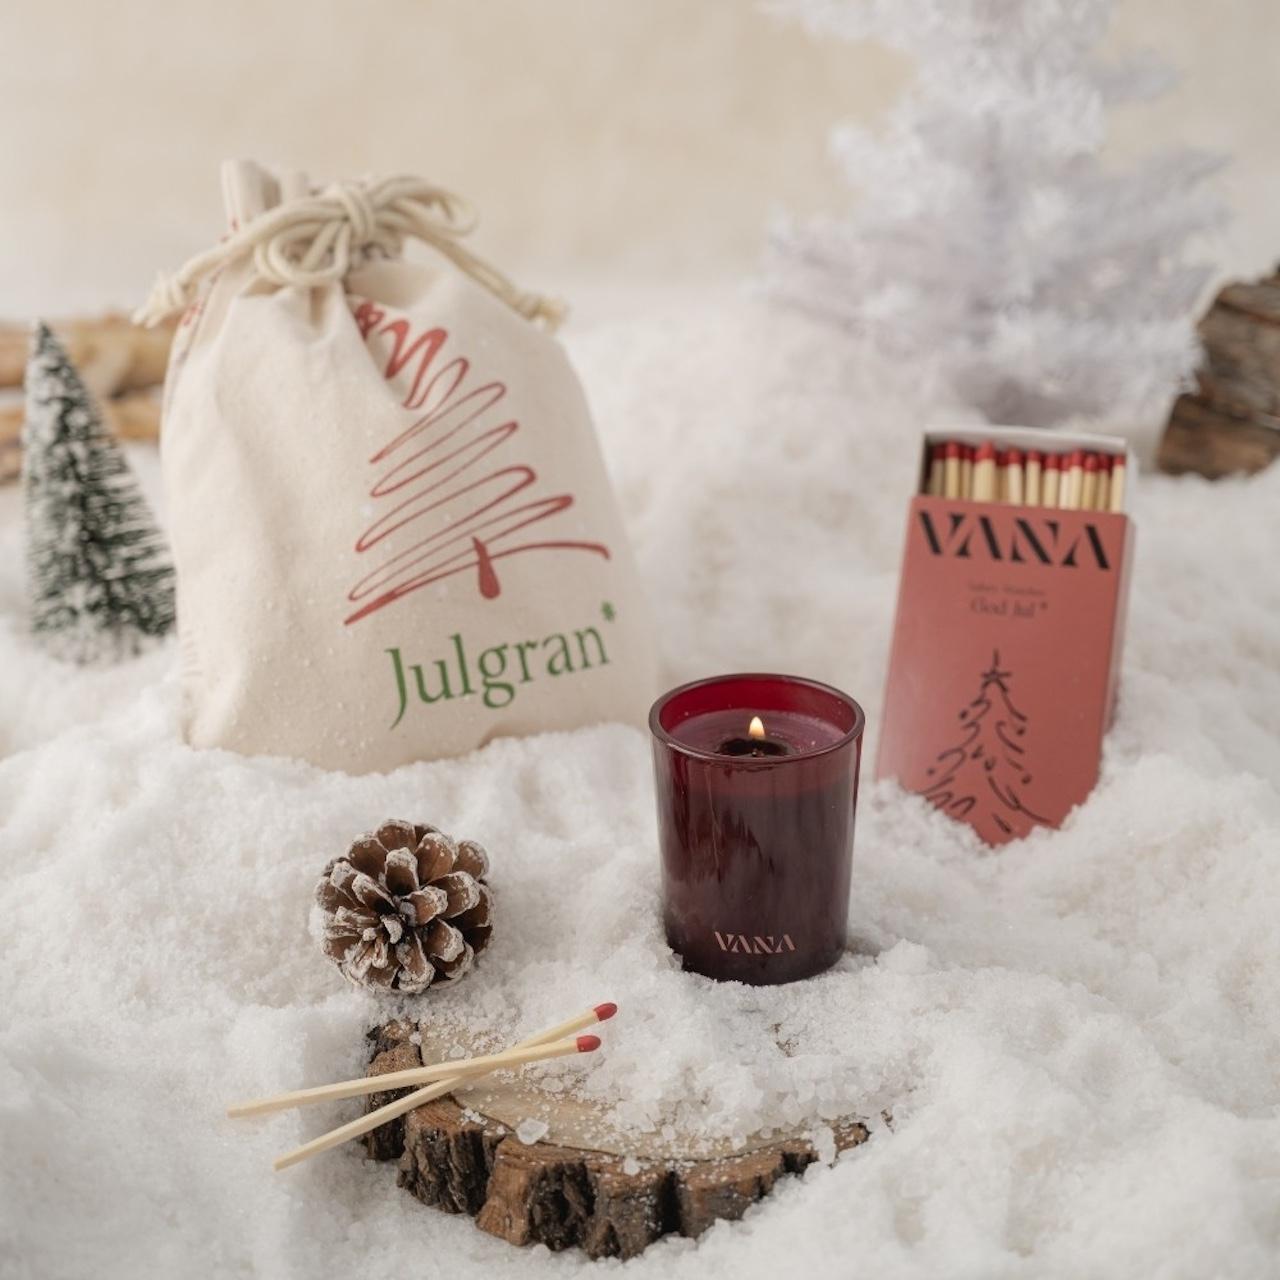 Get into the Christmas Spirit with These Festive Home Décor Items